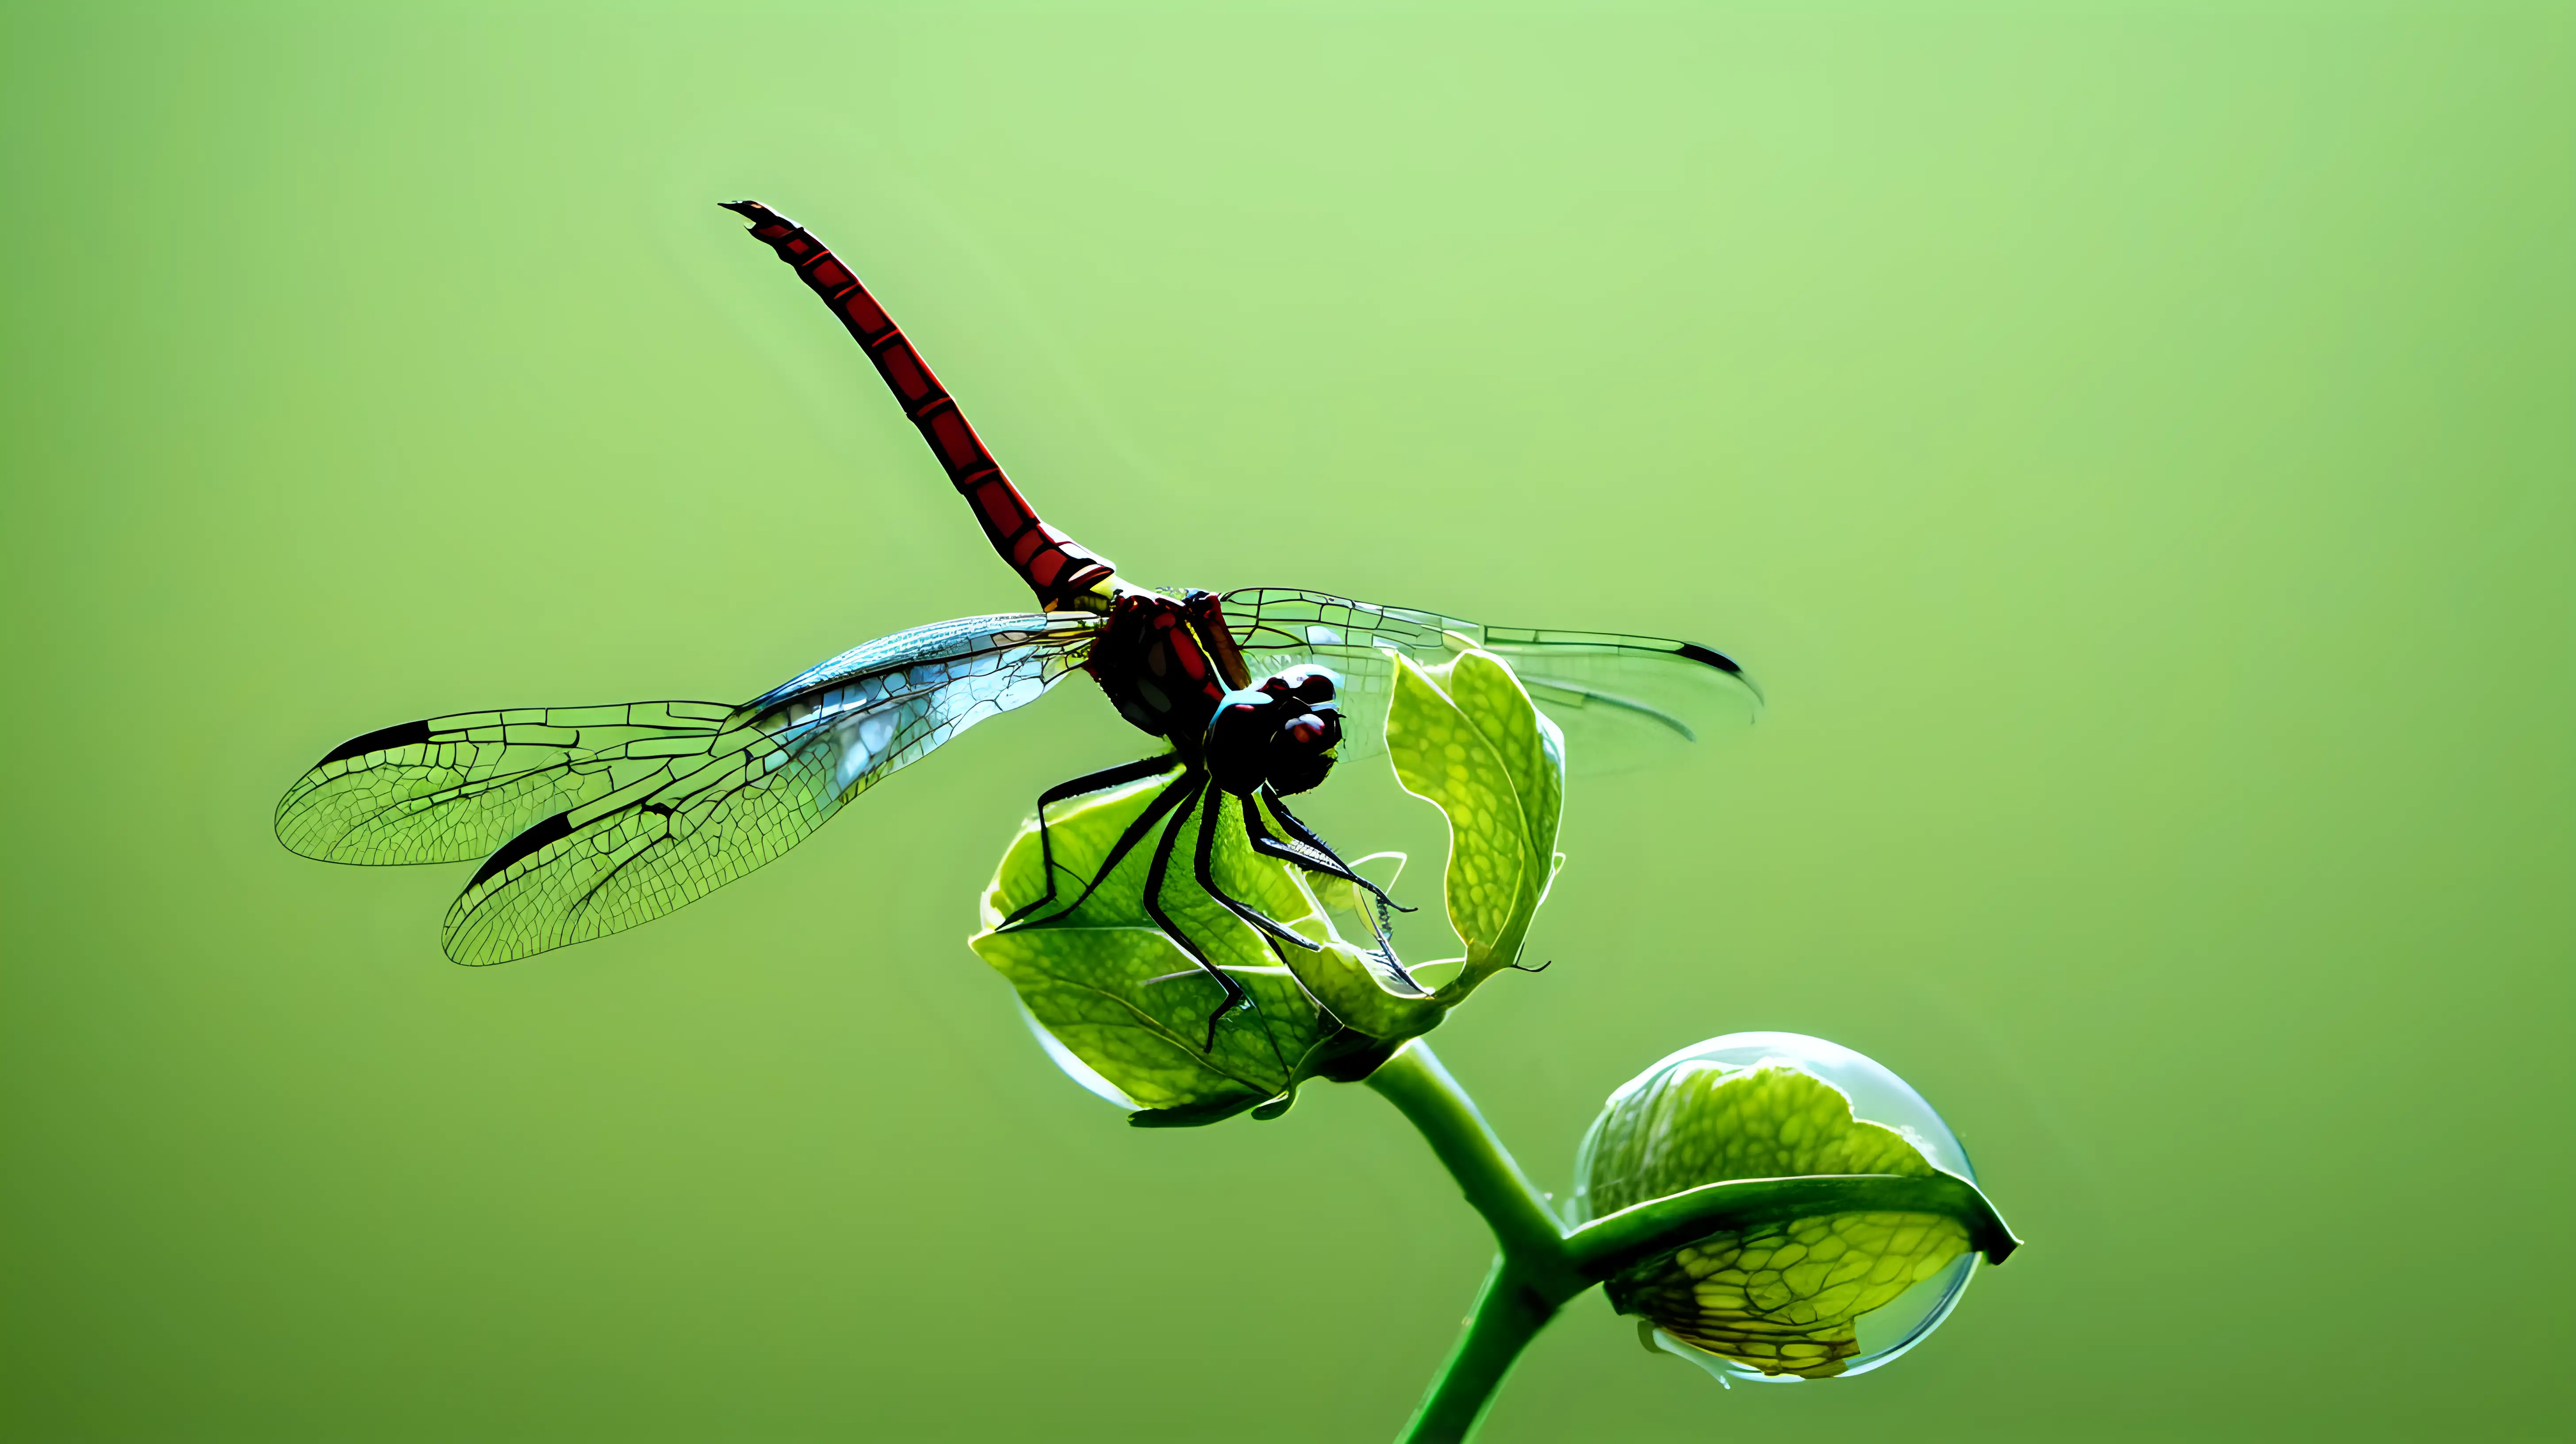 An image of a dragonfly nymph clinging to a submerged plant, showcasing the fascinating aquatic stage of the dragonfly life cycle.